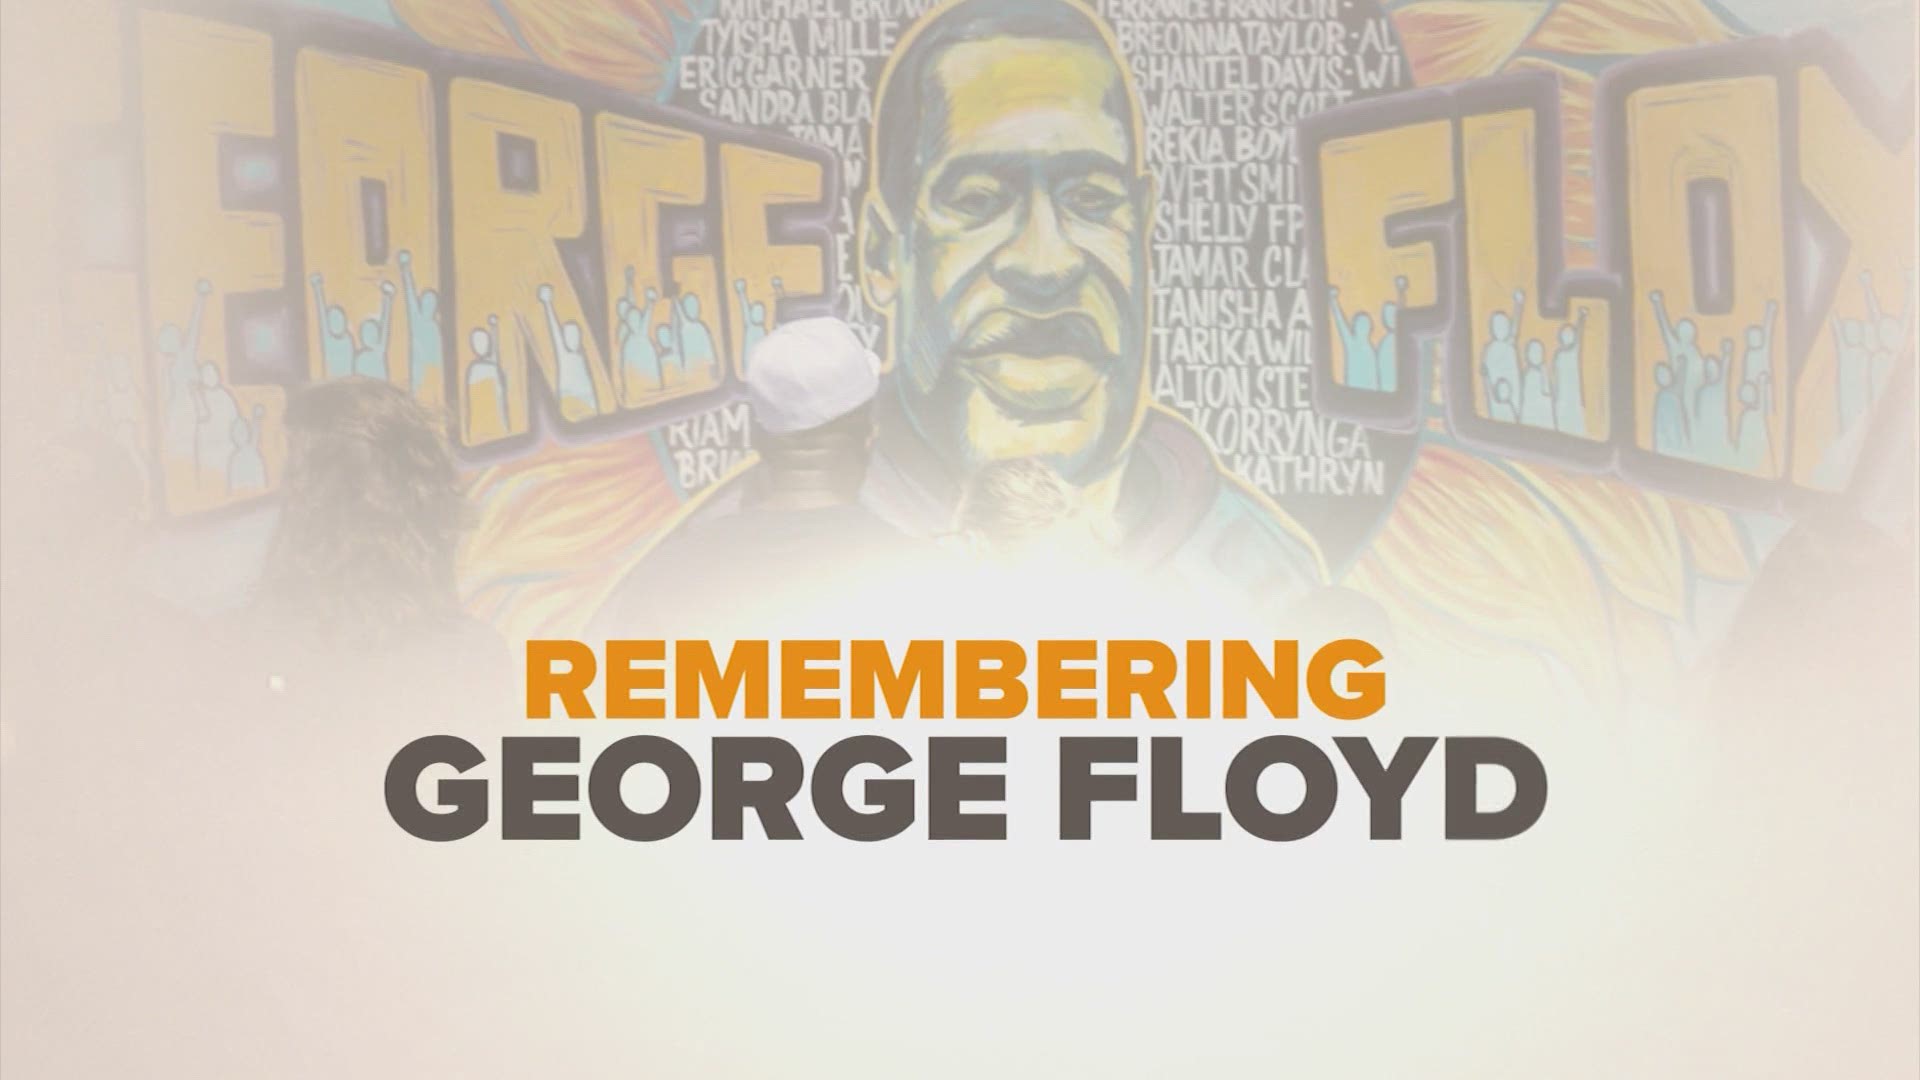 The world is remembering Houston native, George Floyd. He was killed a year ago today by fired Minneapolis police officer, Derek Chauvin.